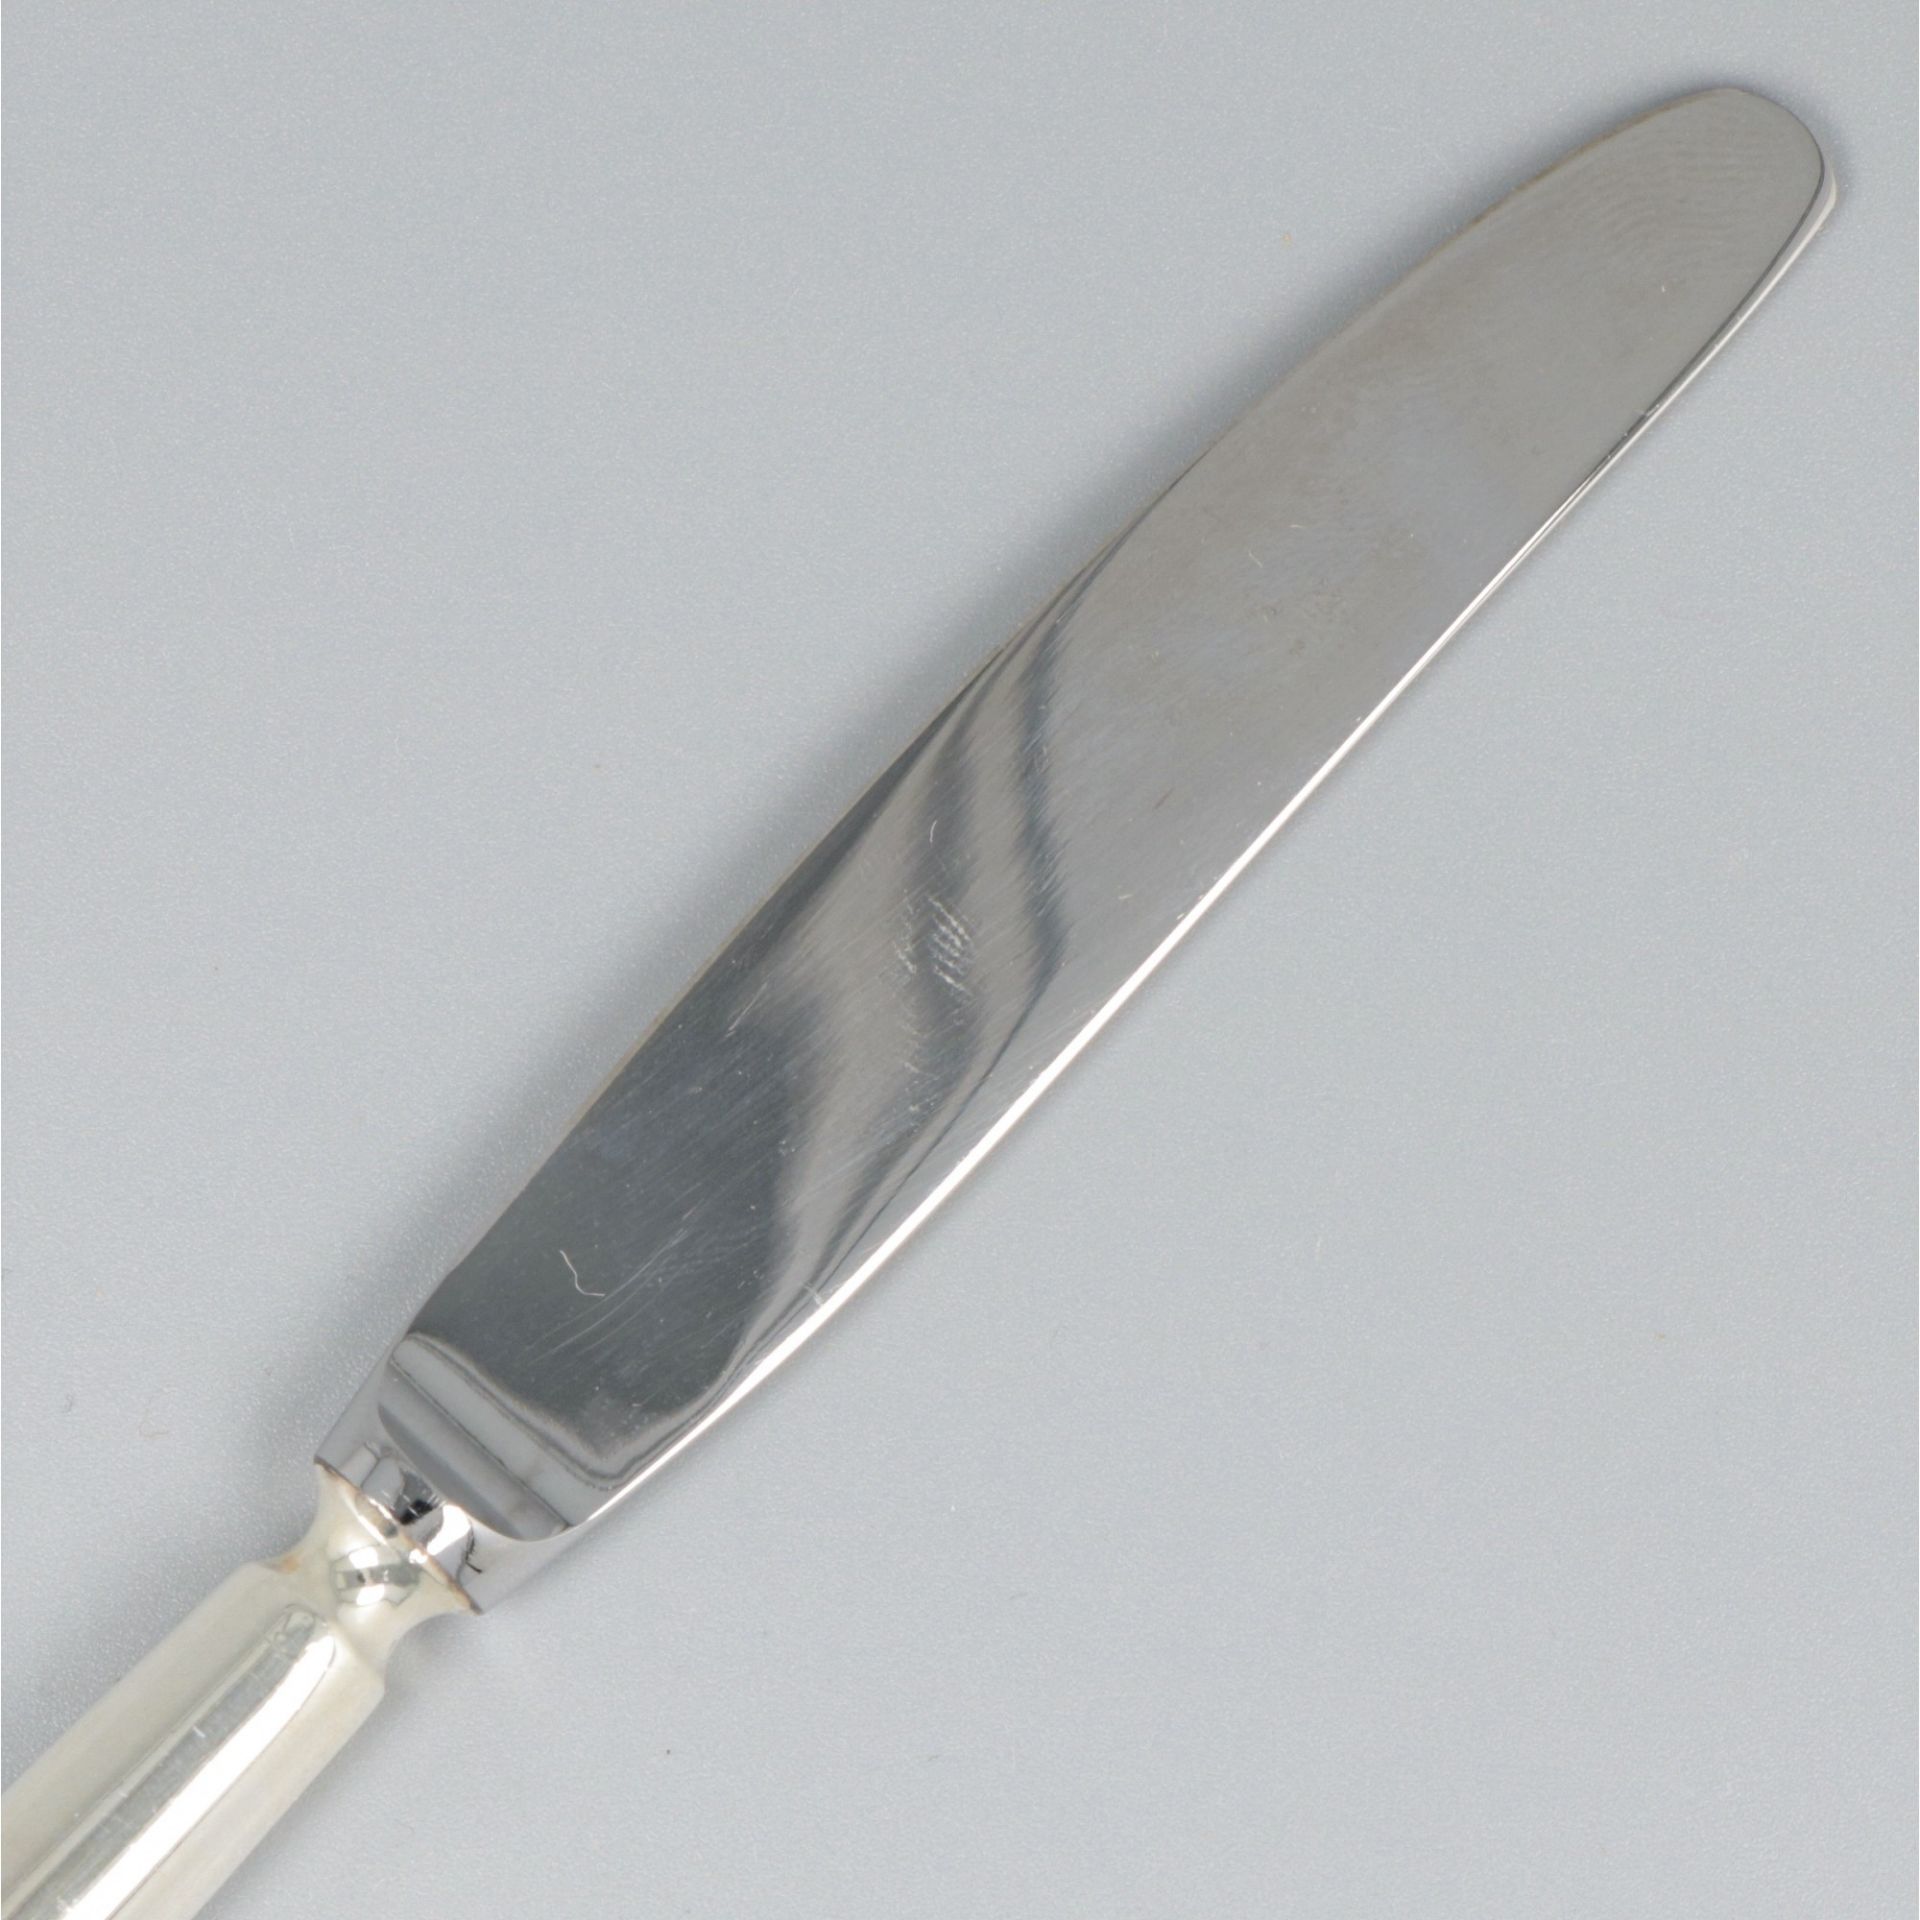 6-piece set of fruit knives silver. - Image 8 of 9